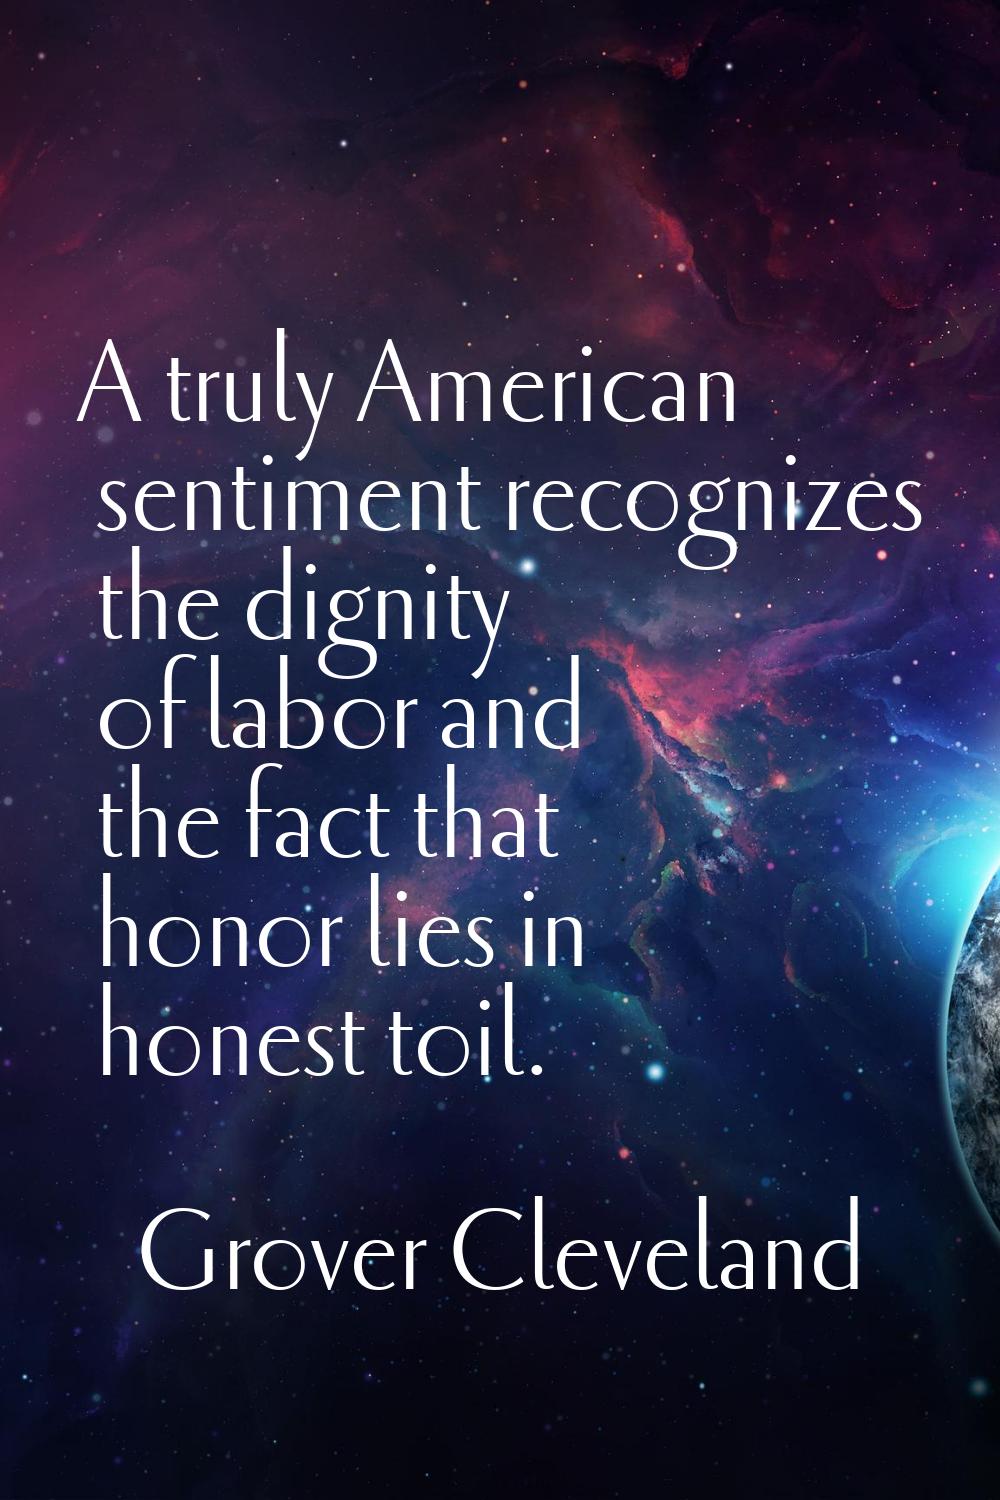 A truly American sentiment recognizes the dignity of labor and the fact that honor lies in honest t